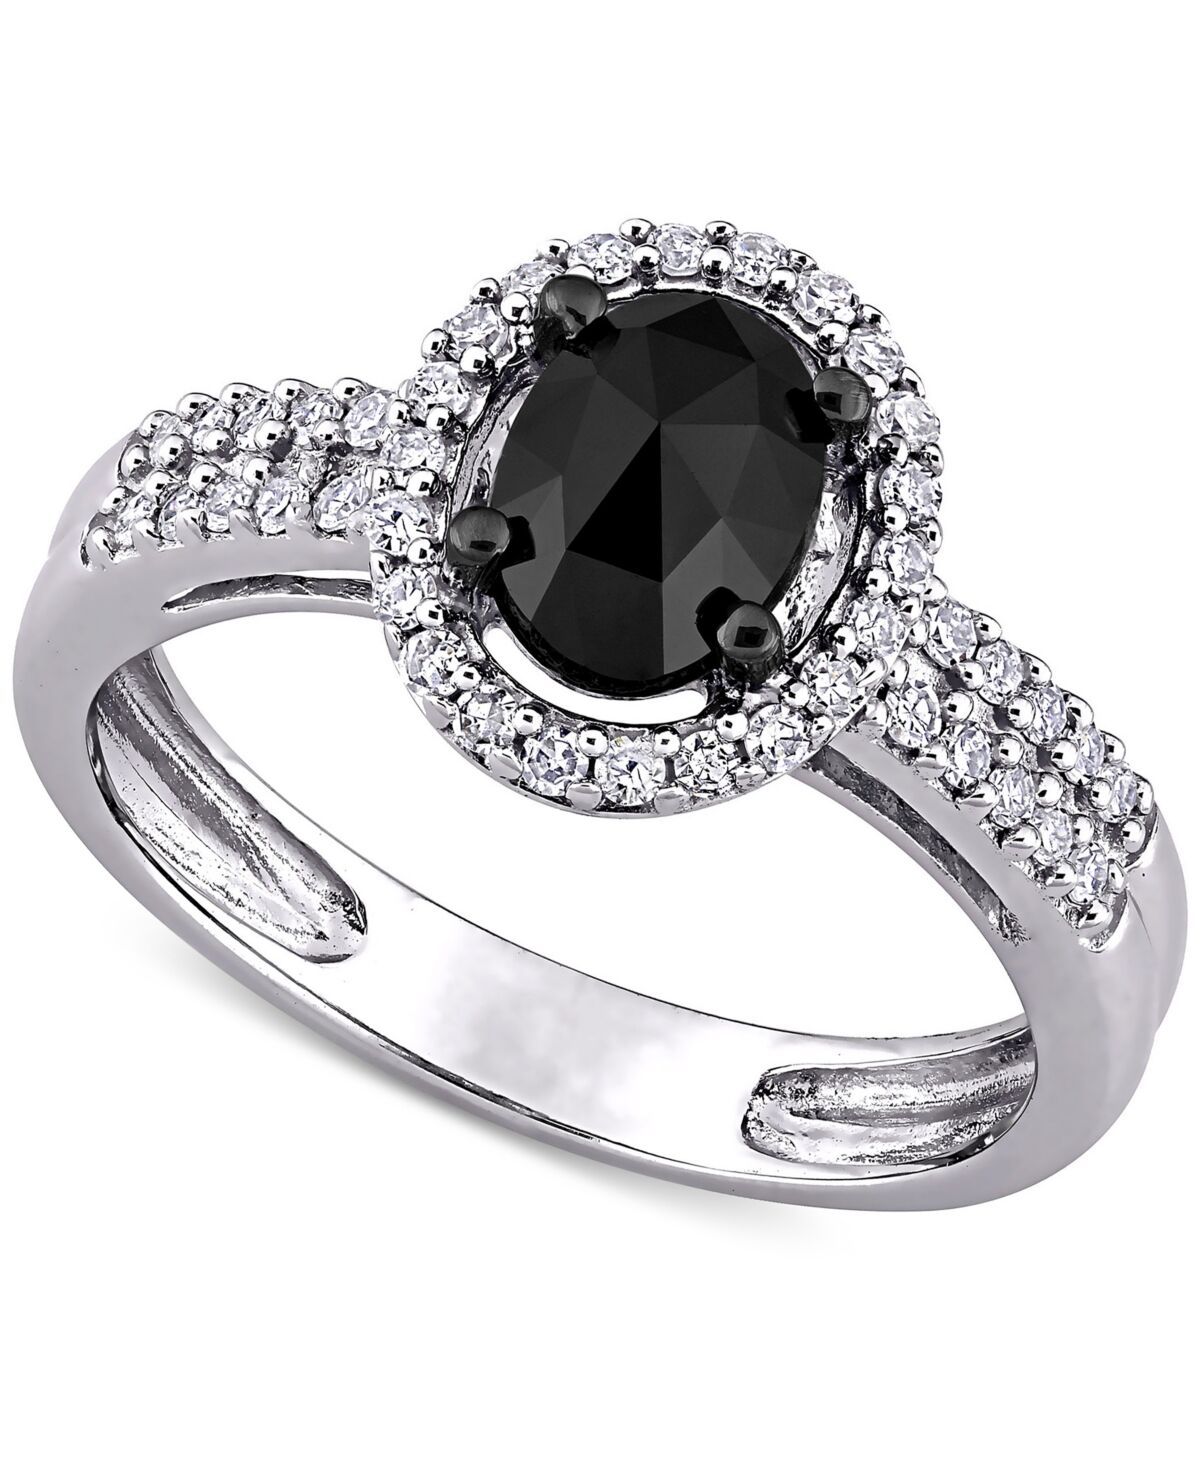 Macy's Diamond Black Oval Halo Management Ring (1 ct. t.w.) in 14k White Gold - White Gold